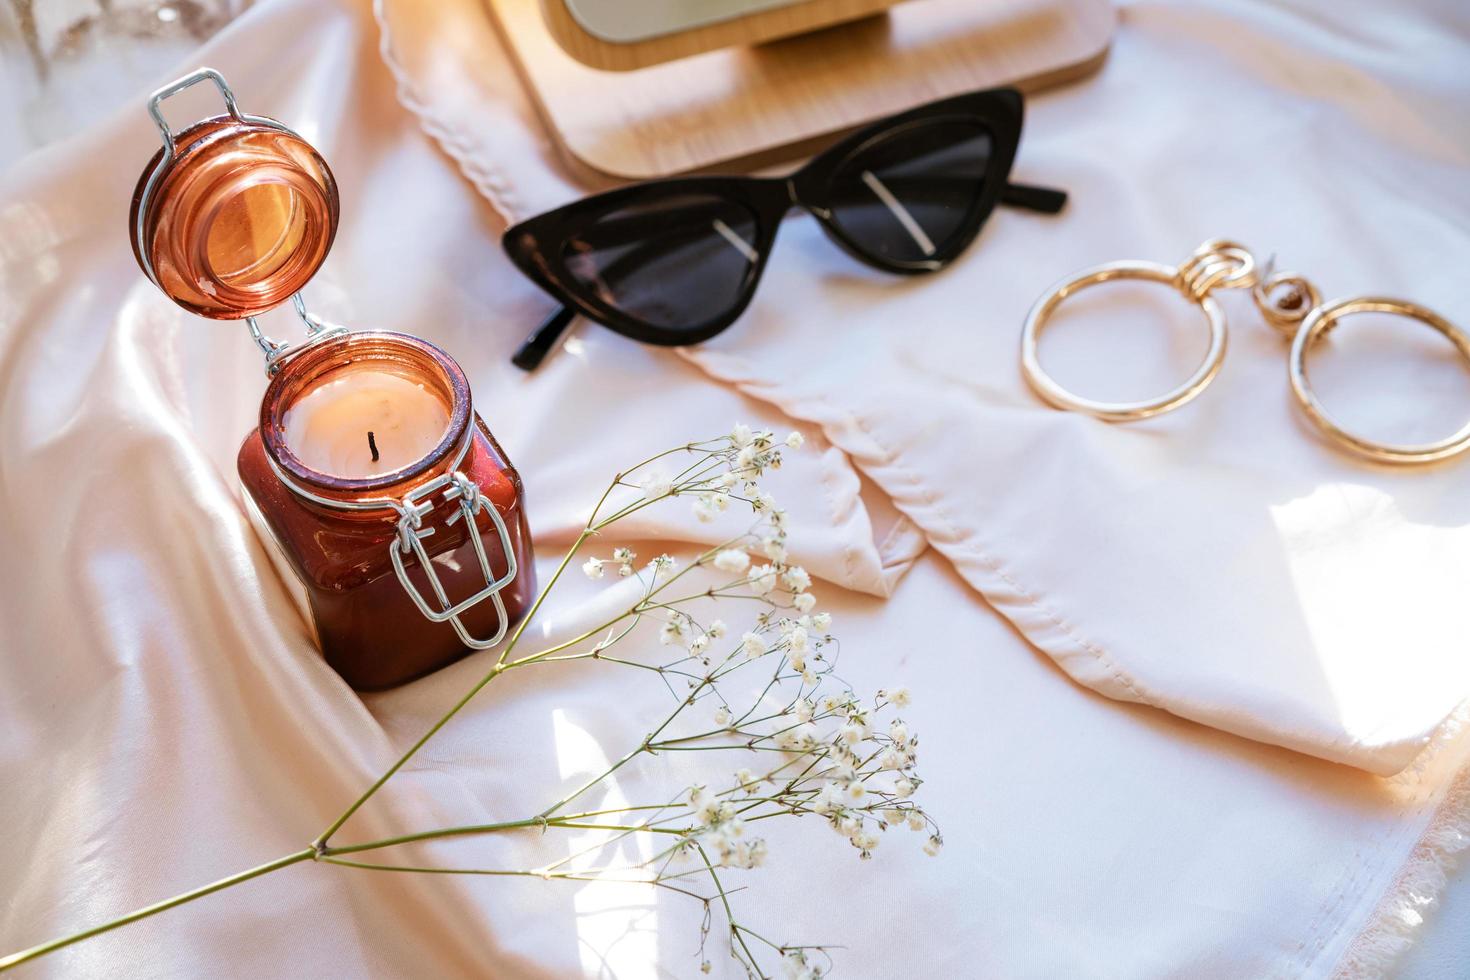 there is a decorative candle in a jar and glasses on the fabric photo